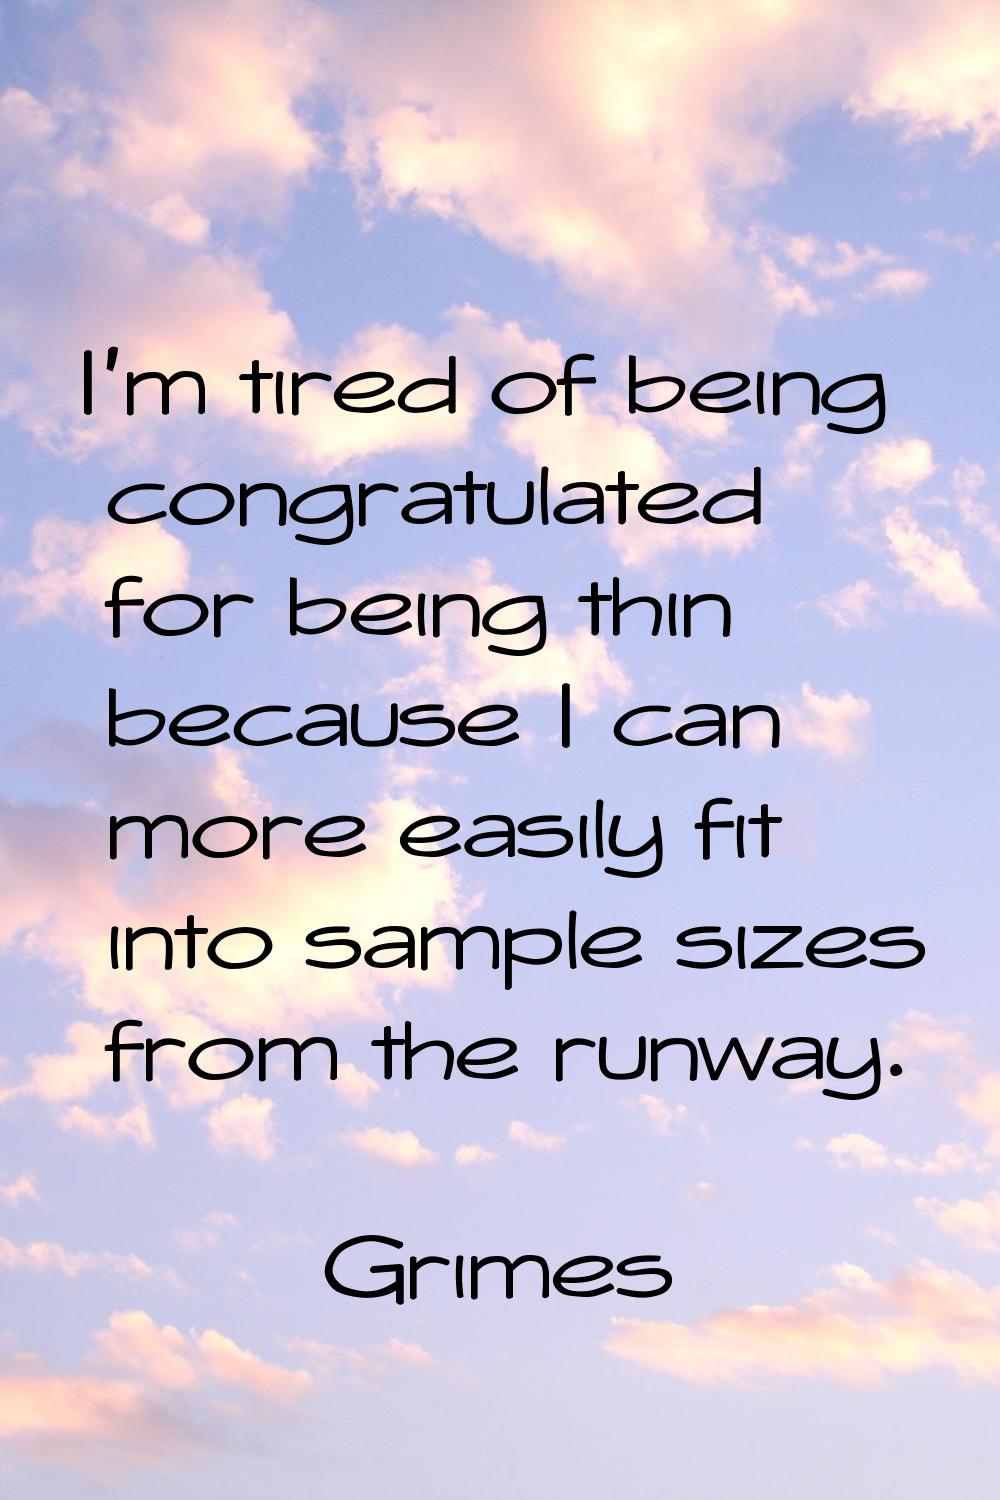 I'm tired of being congratulated for being thin because I can more easily fit into sample sizes fro